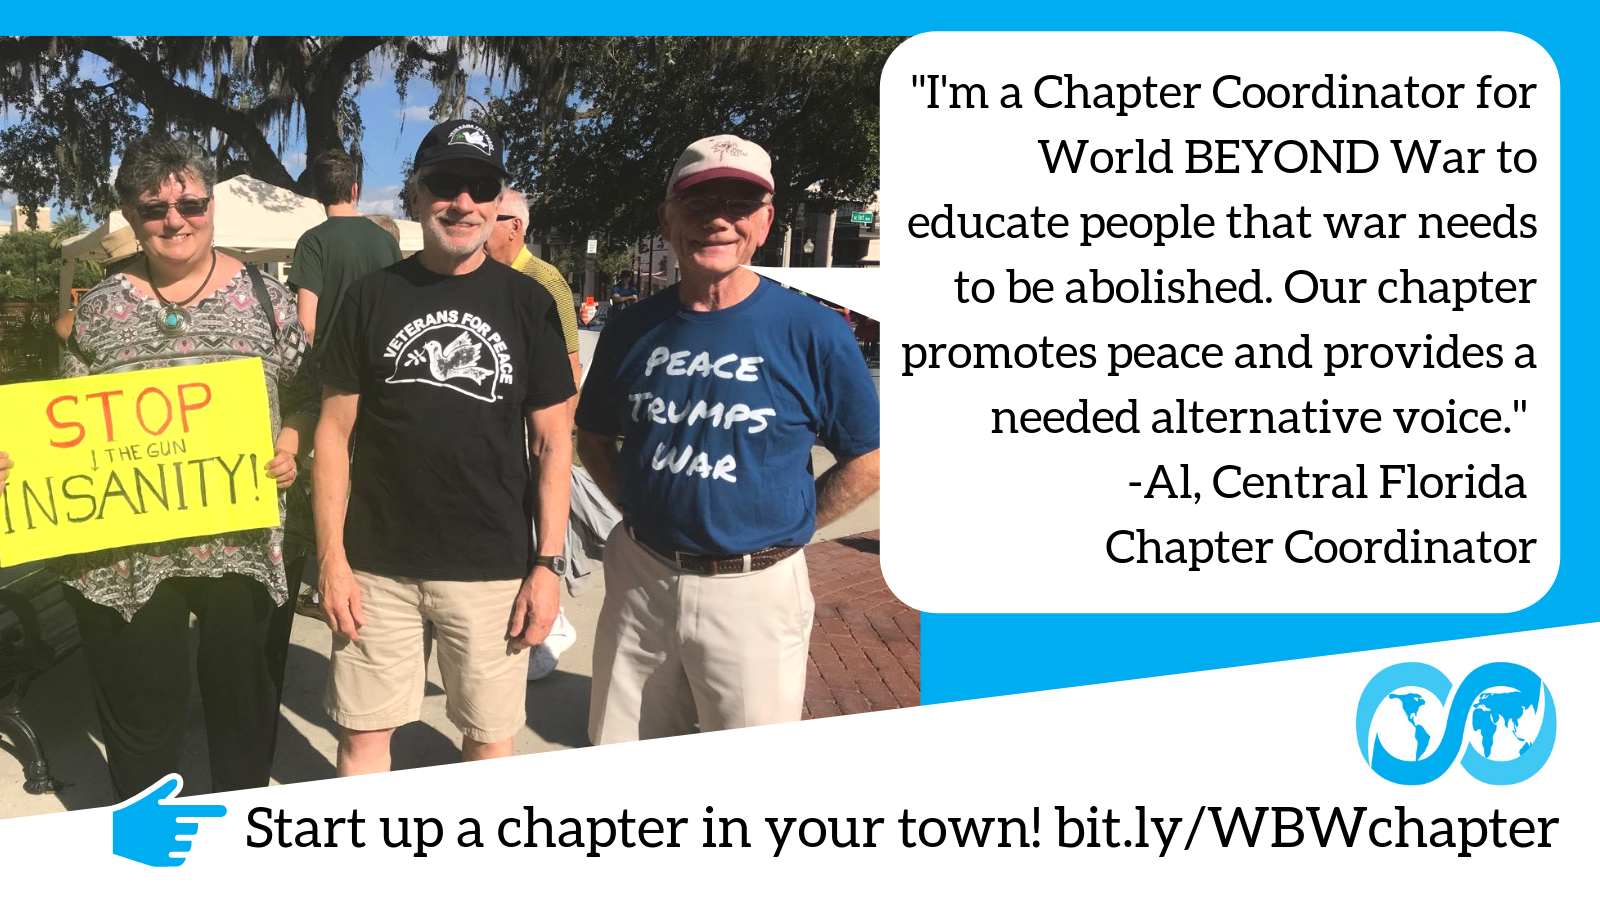 WBW-Chapters-Al